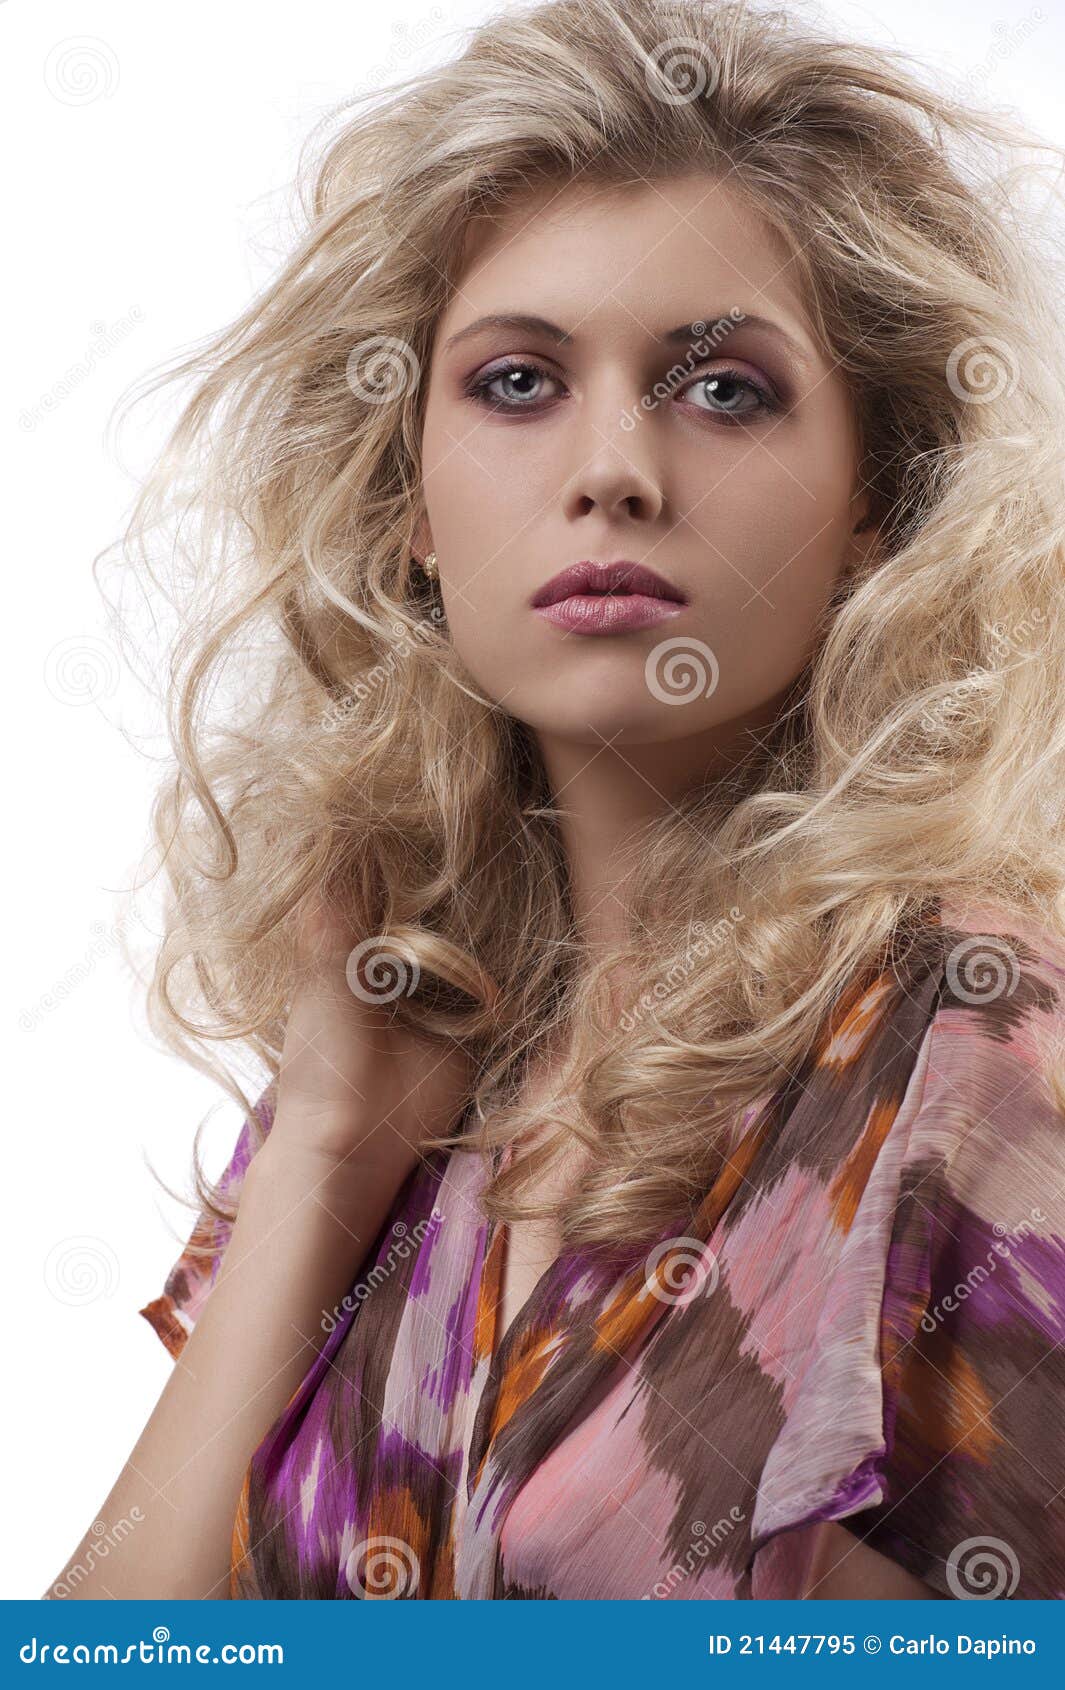 Beautiful Woman with Long Curly Blond Hair Looking Stock Image - Image ...